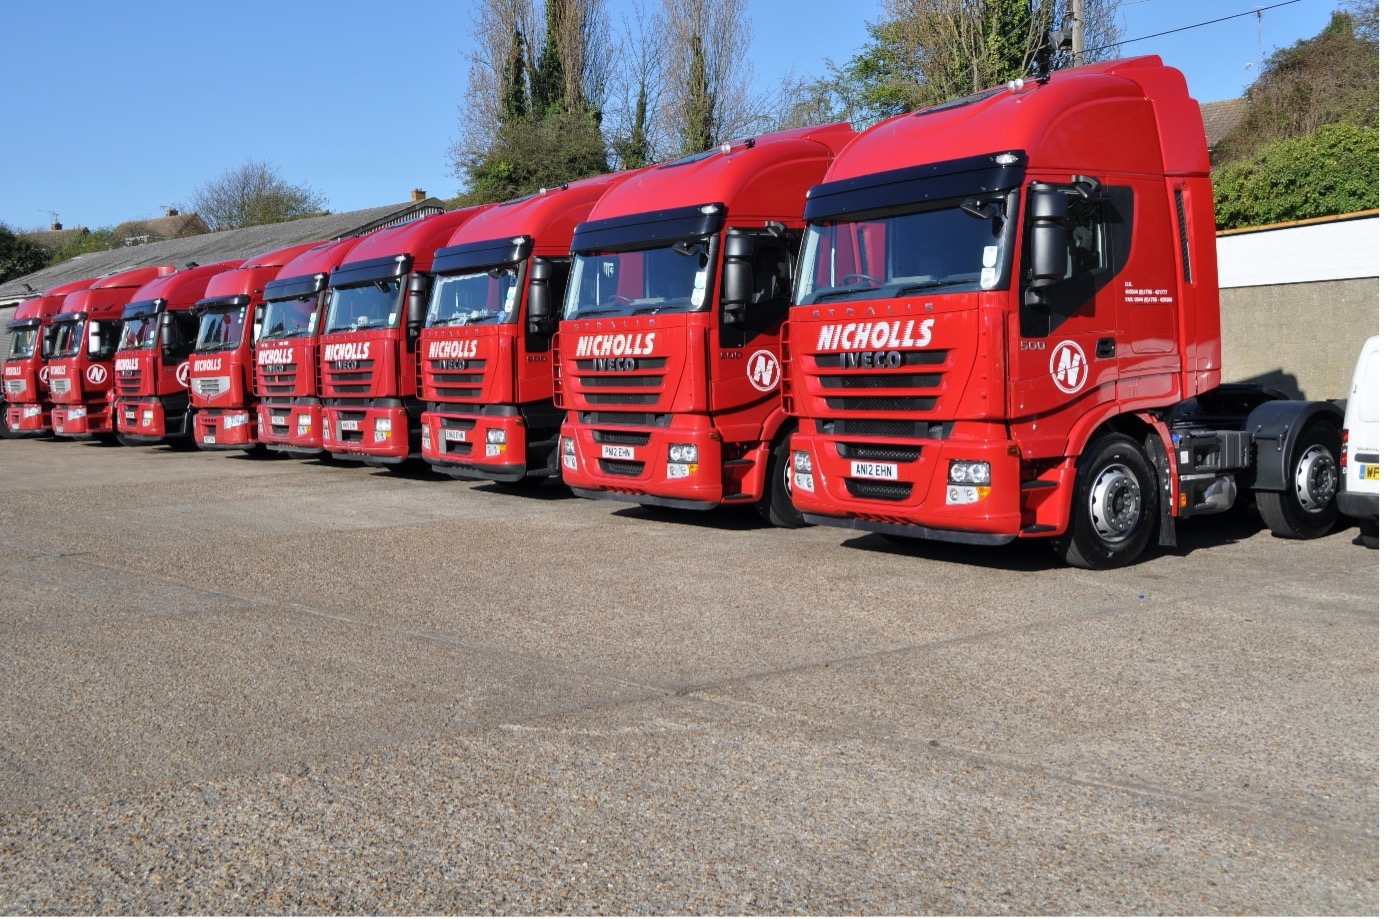 purchase of 12 additional trucks